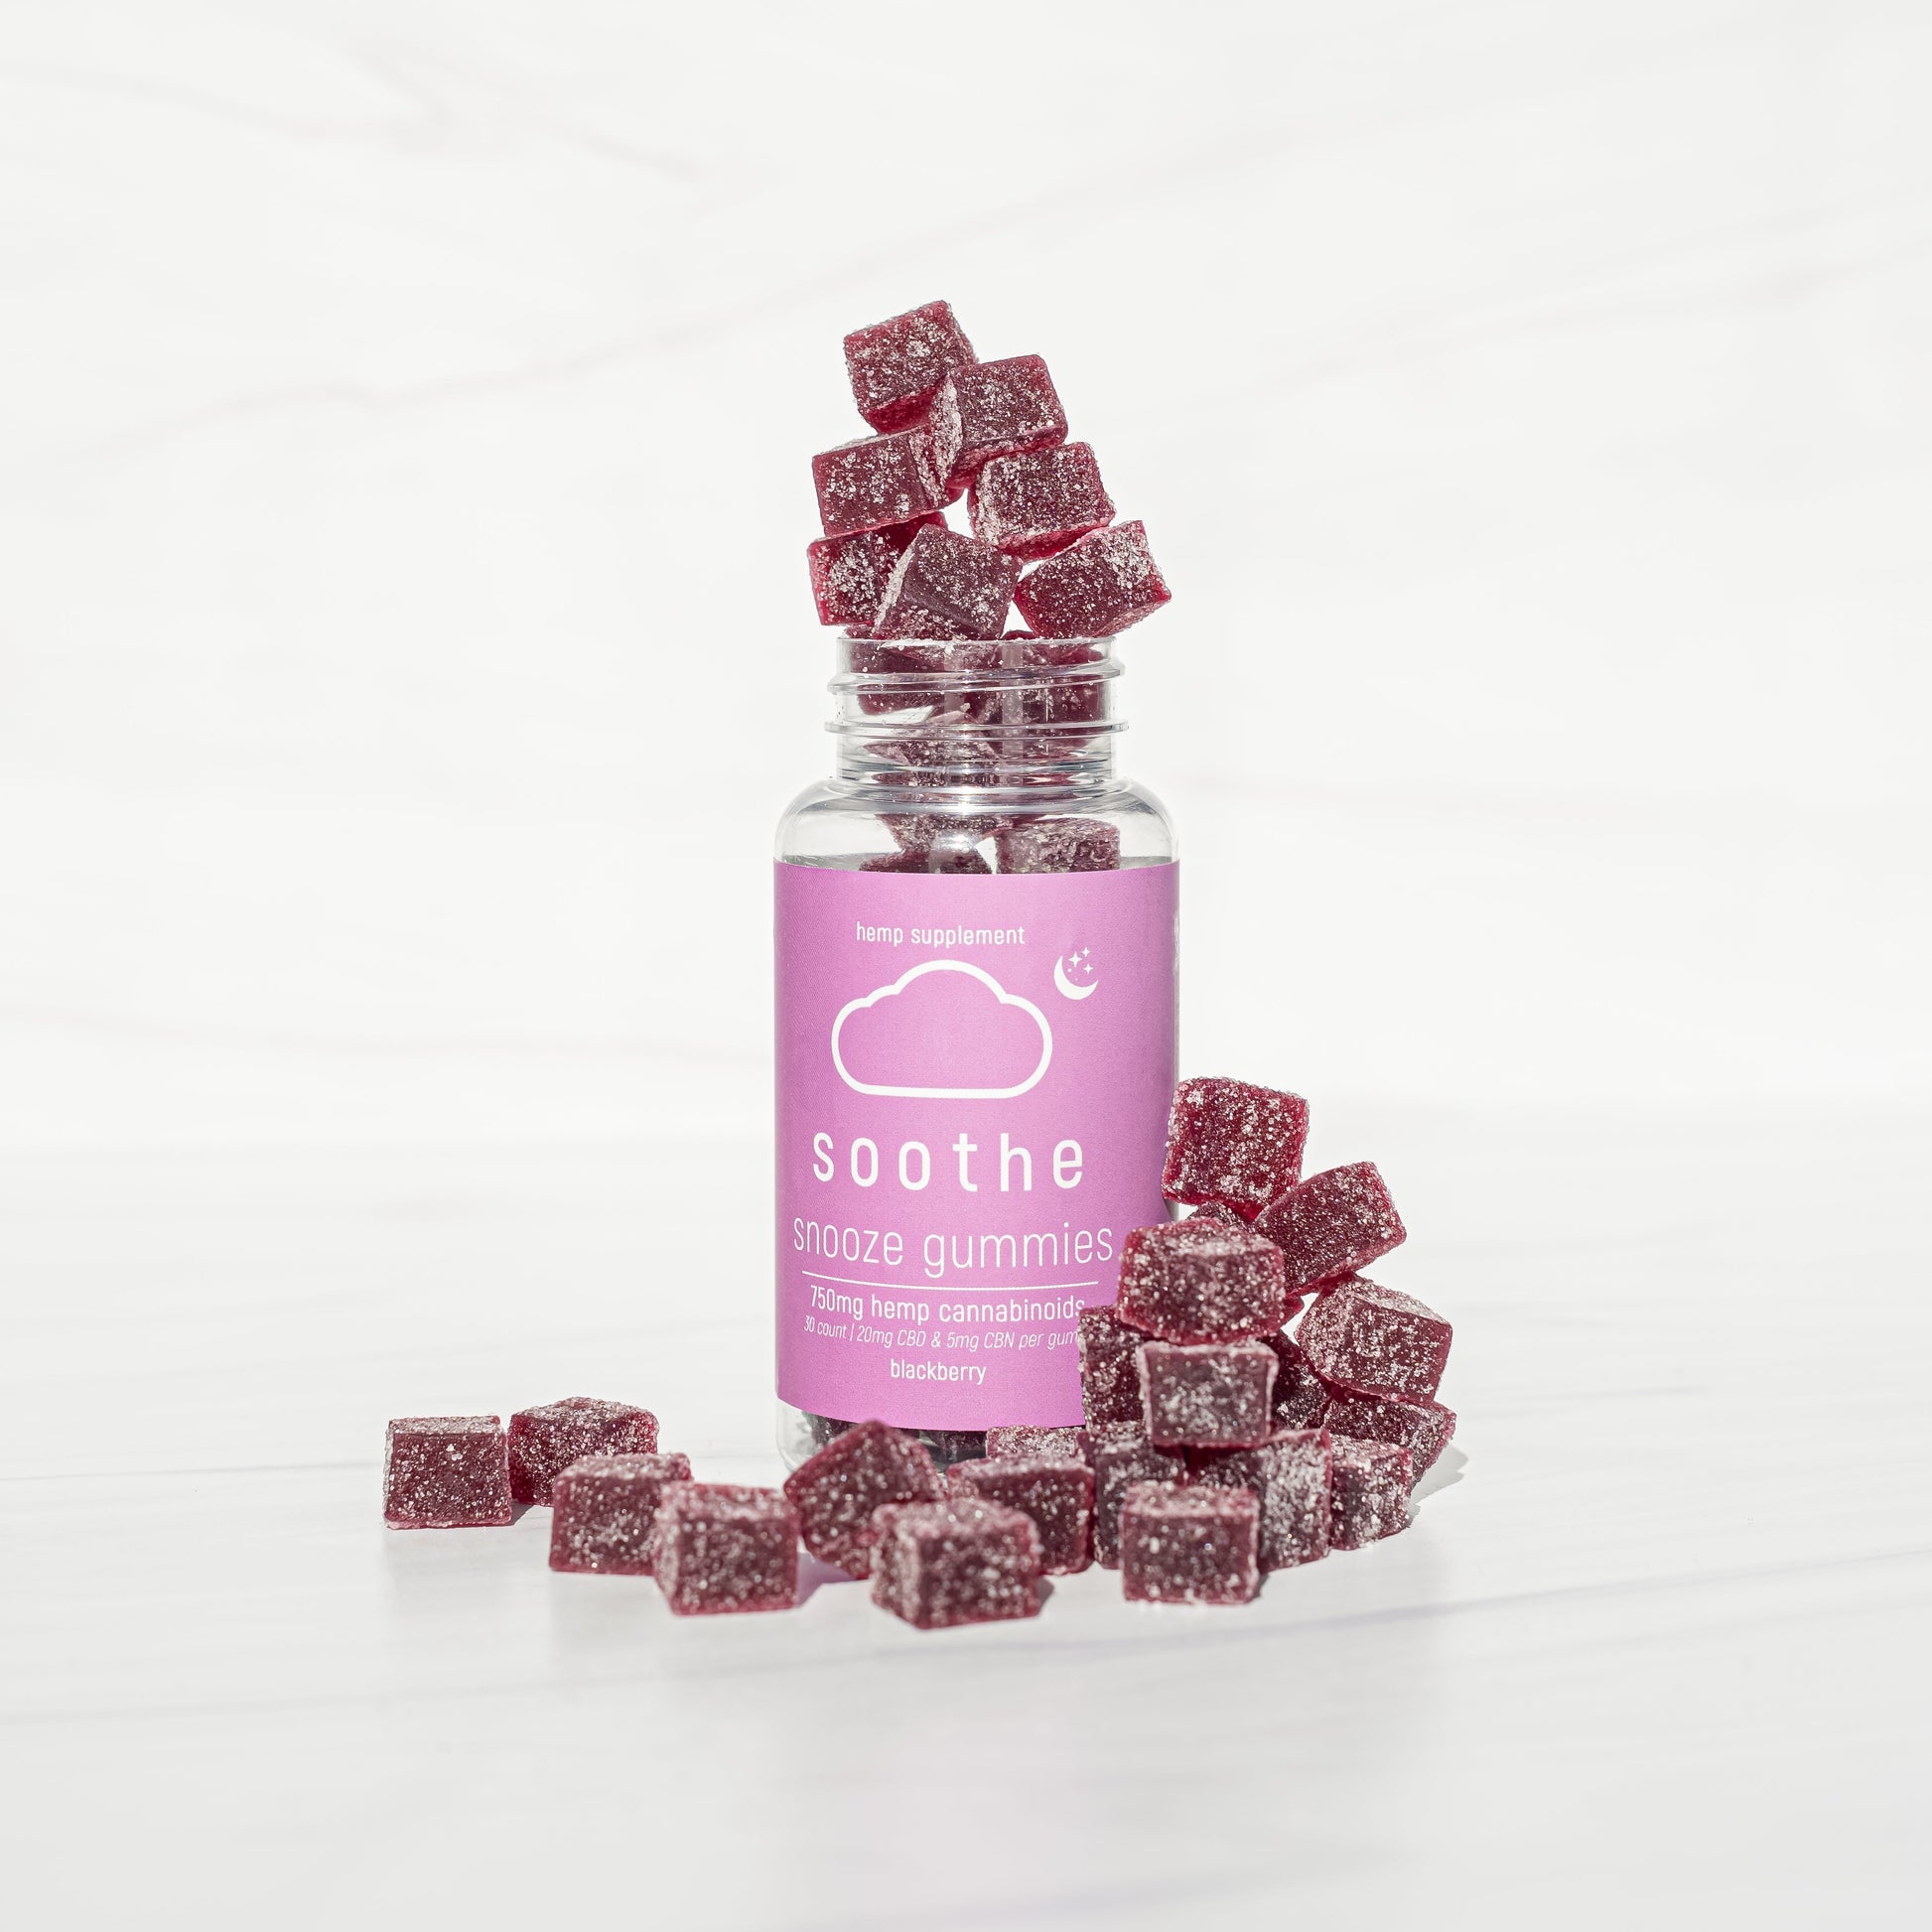 Soothe - Snooze CBN Gummies -